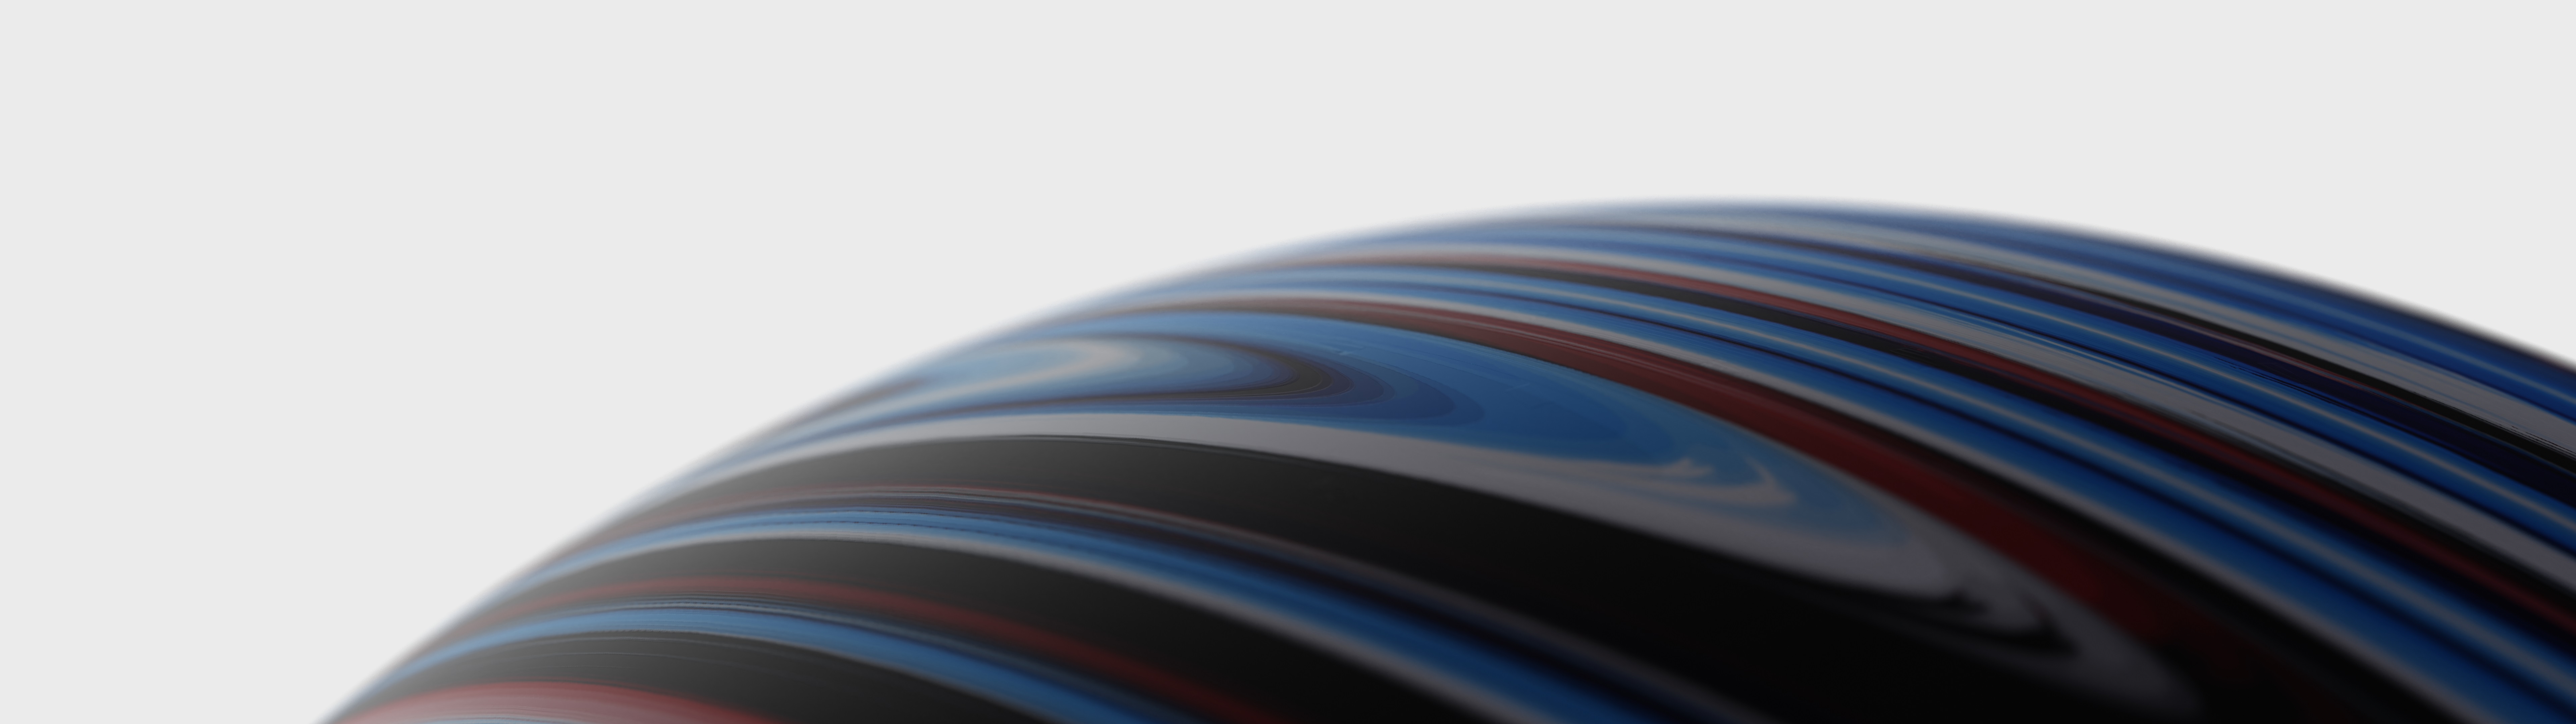 General 7680x2160 planet ball wide screen white blue CGI digital art simple background white background sphere